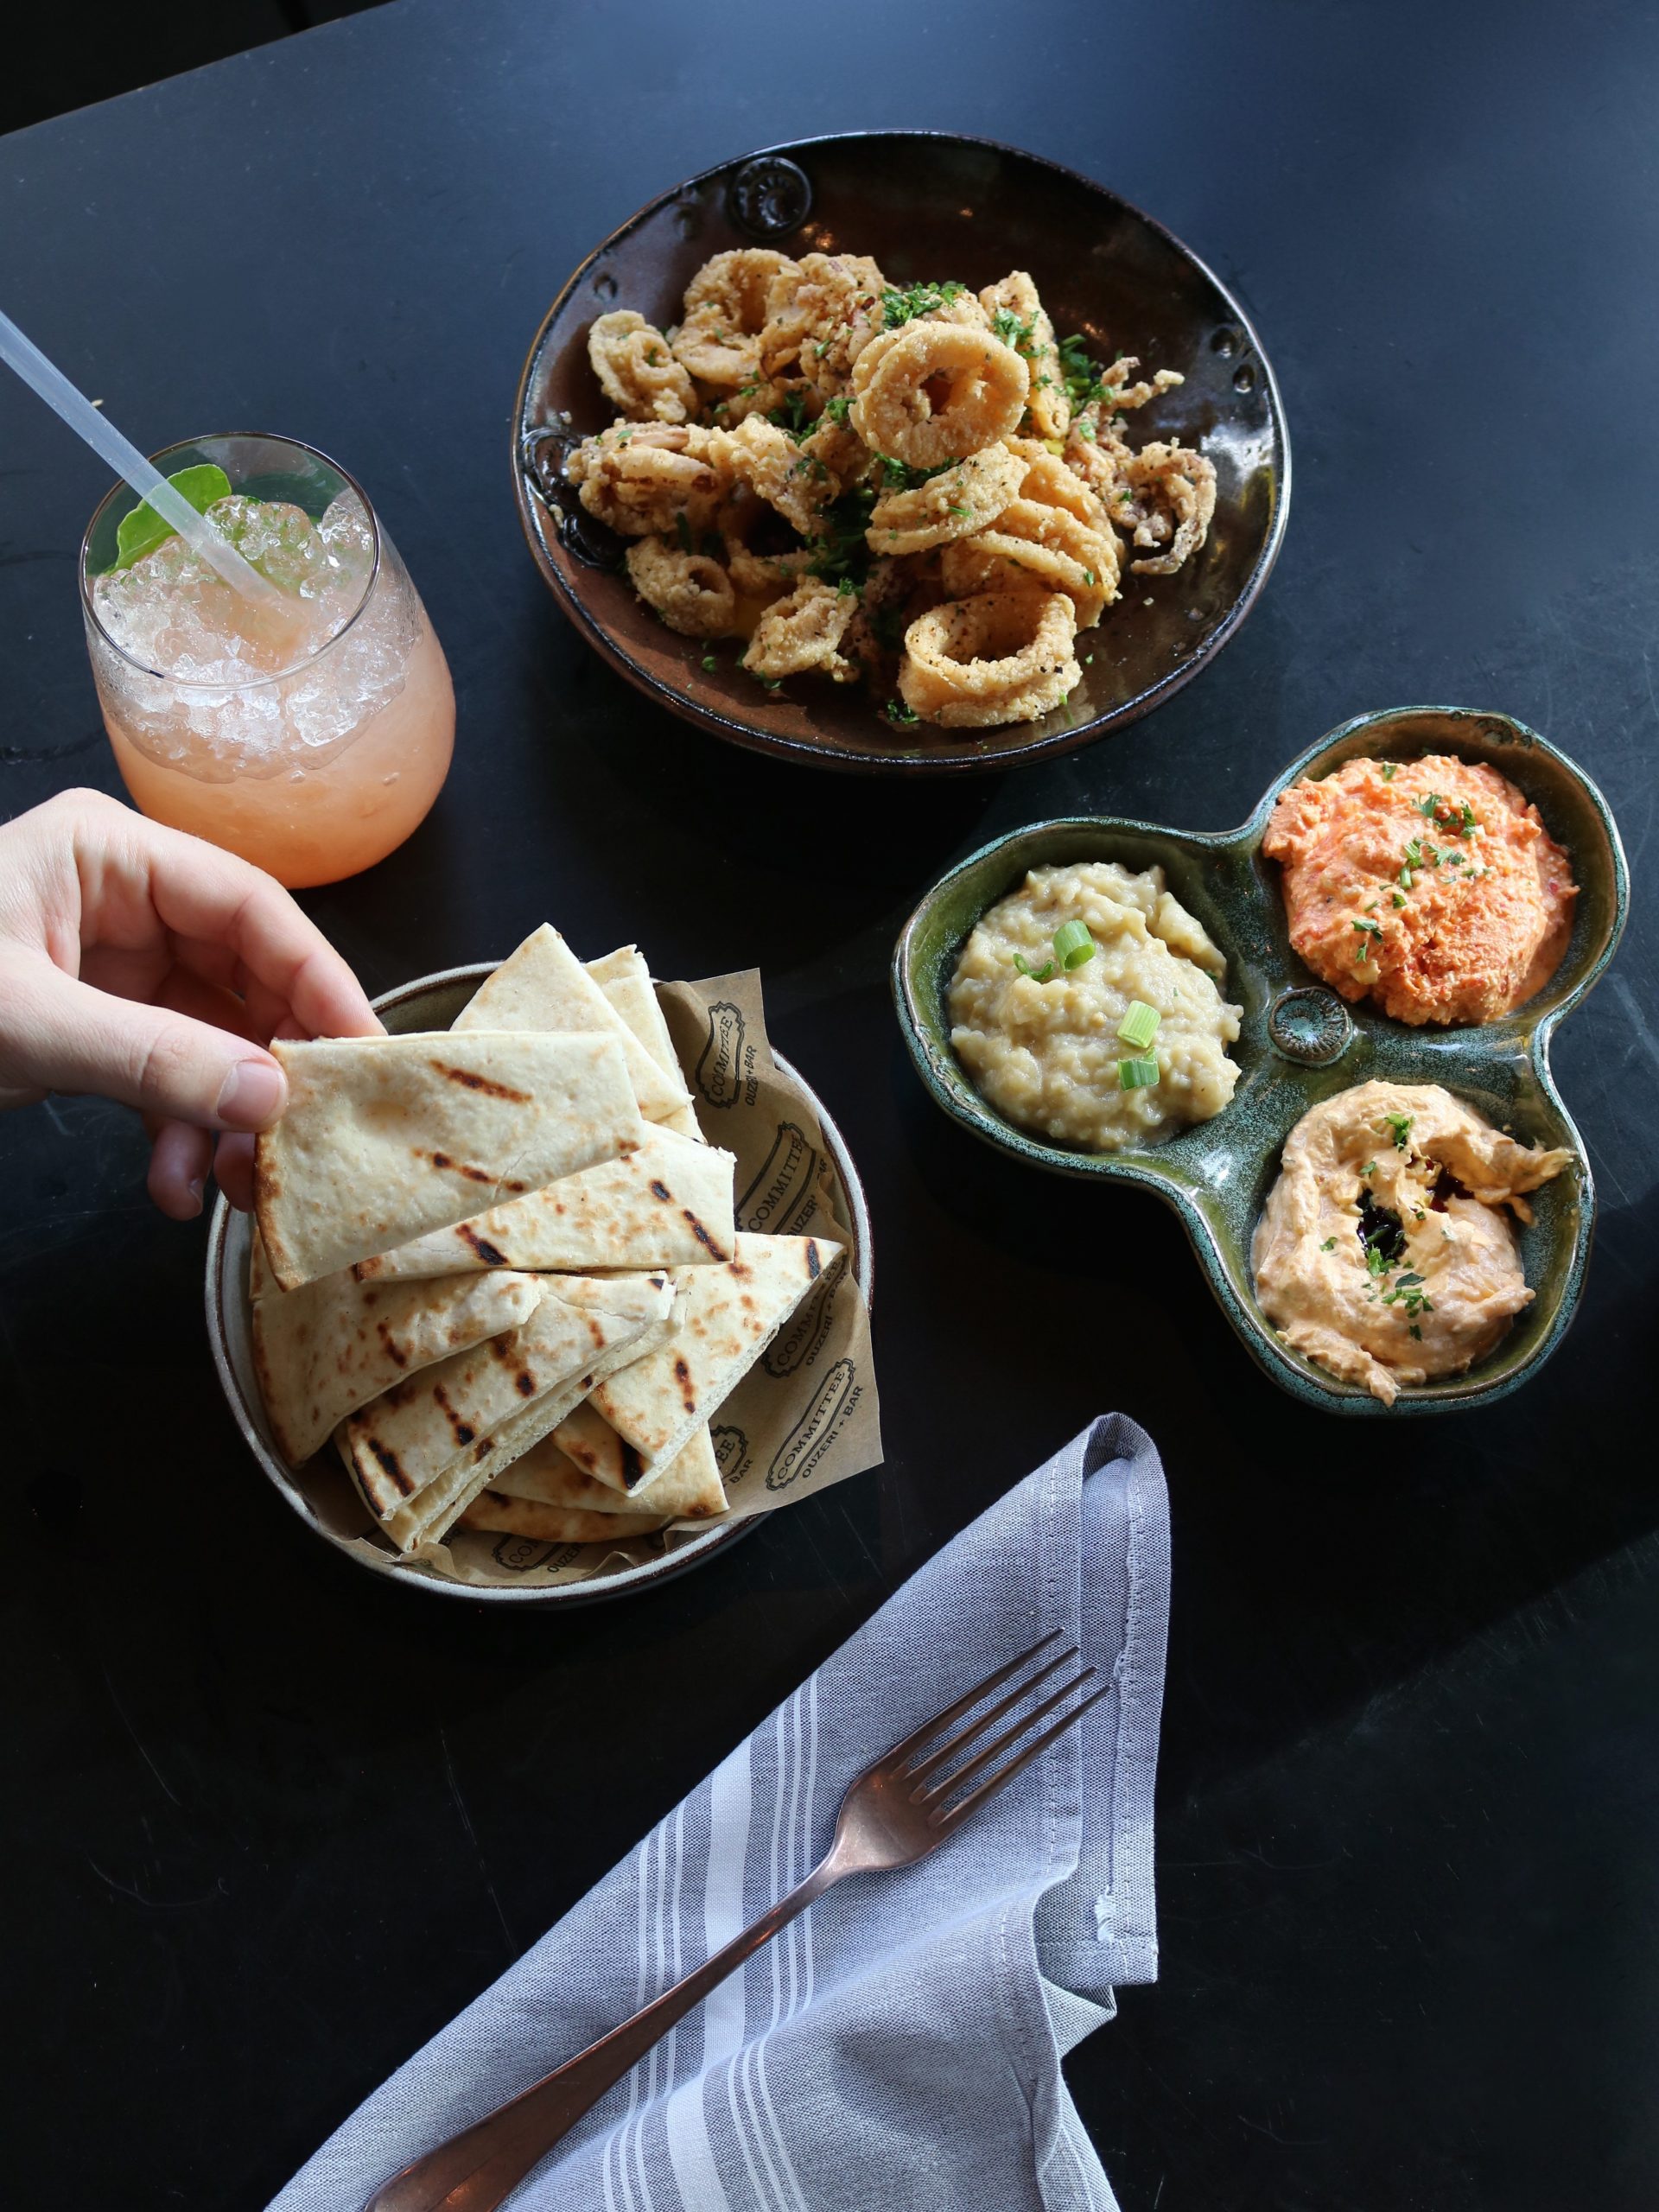 Fried Calamari with Pita and Dips at Committee - Mediterranean Food in Boston's Seaport District